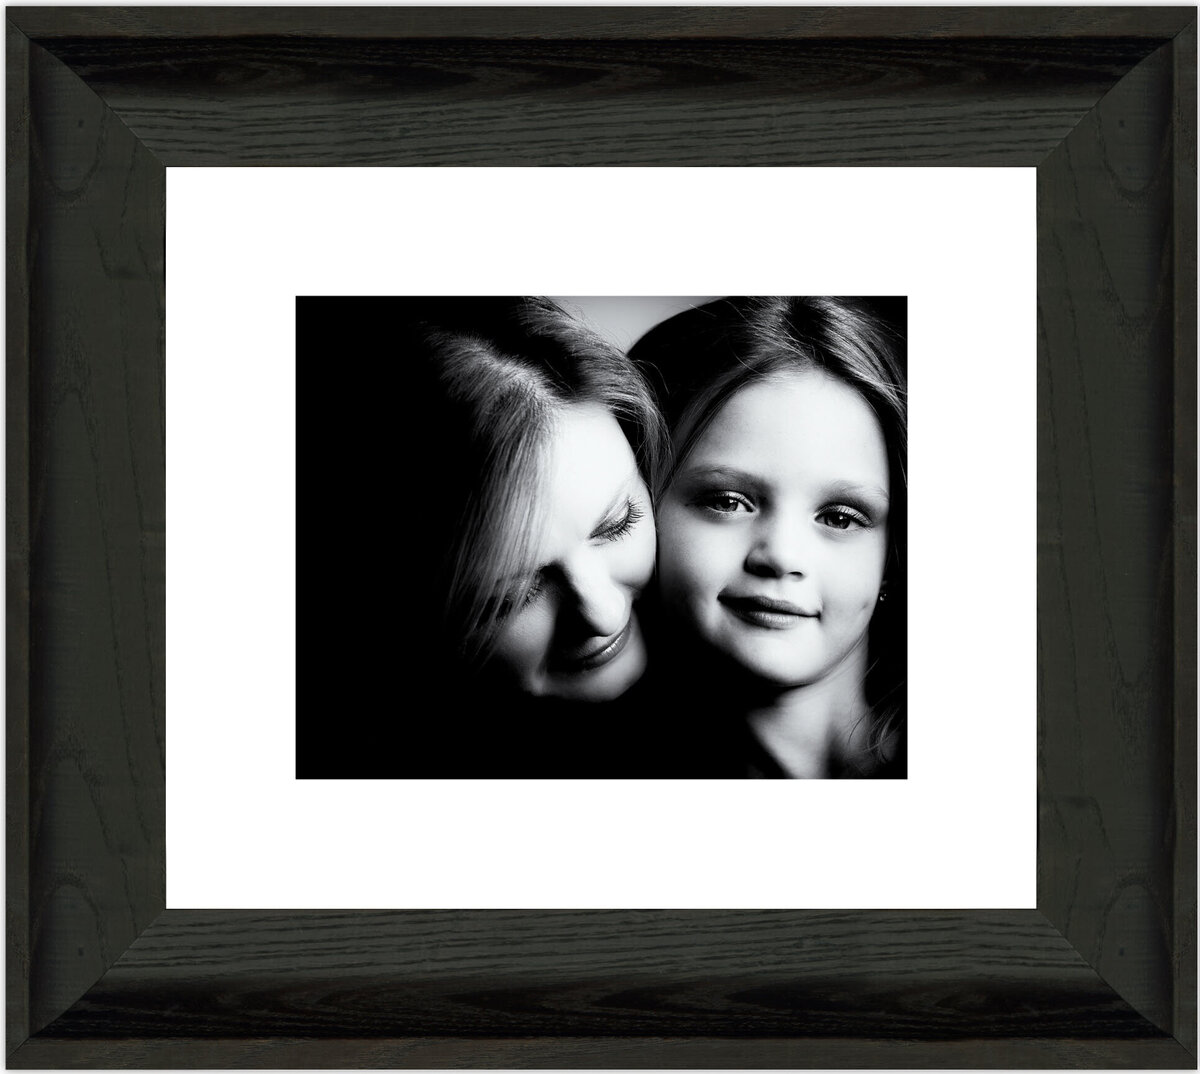 Mother & Child Black & White portrait, mounted in a Gallery Black frame with White Mat